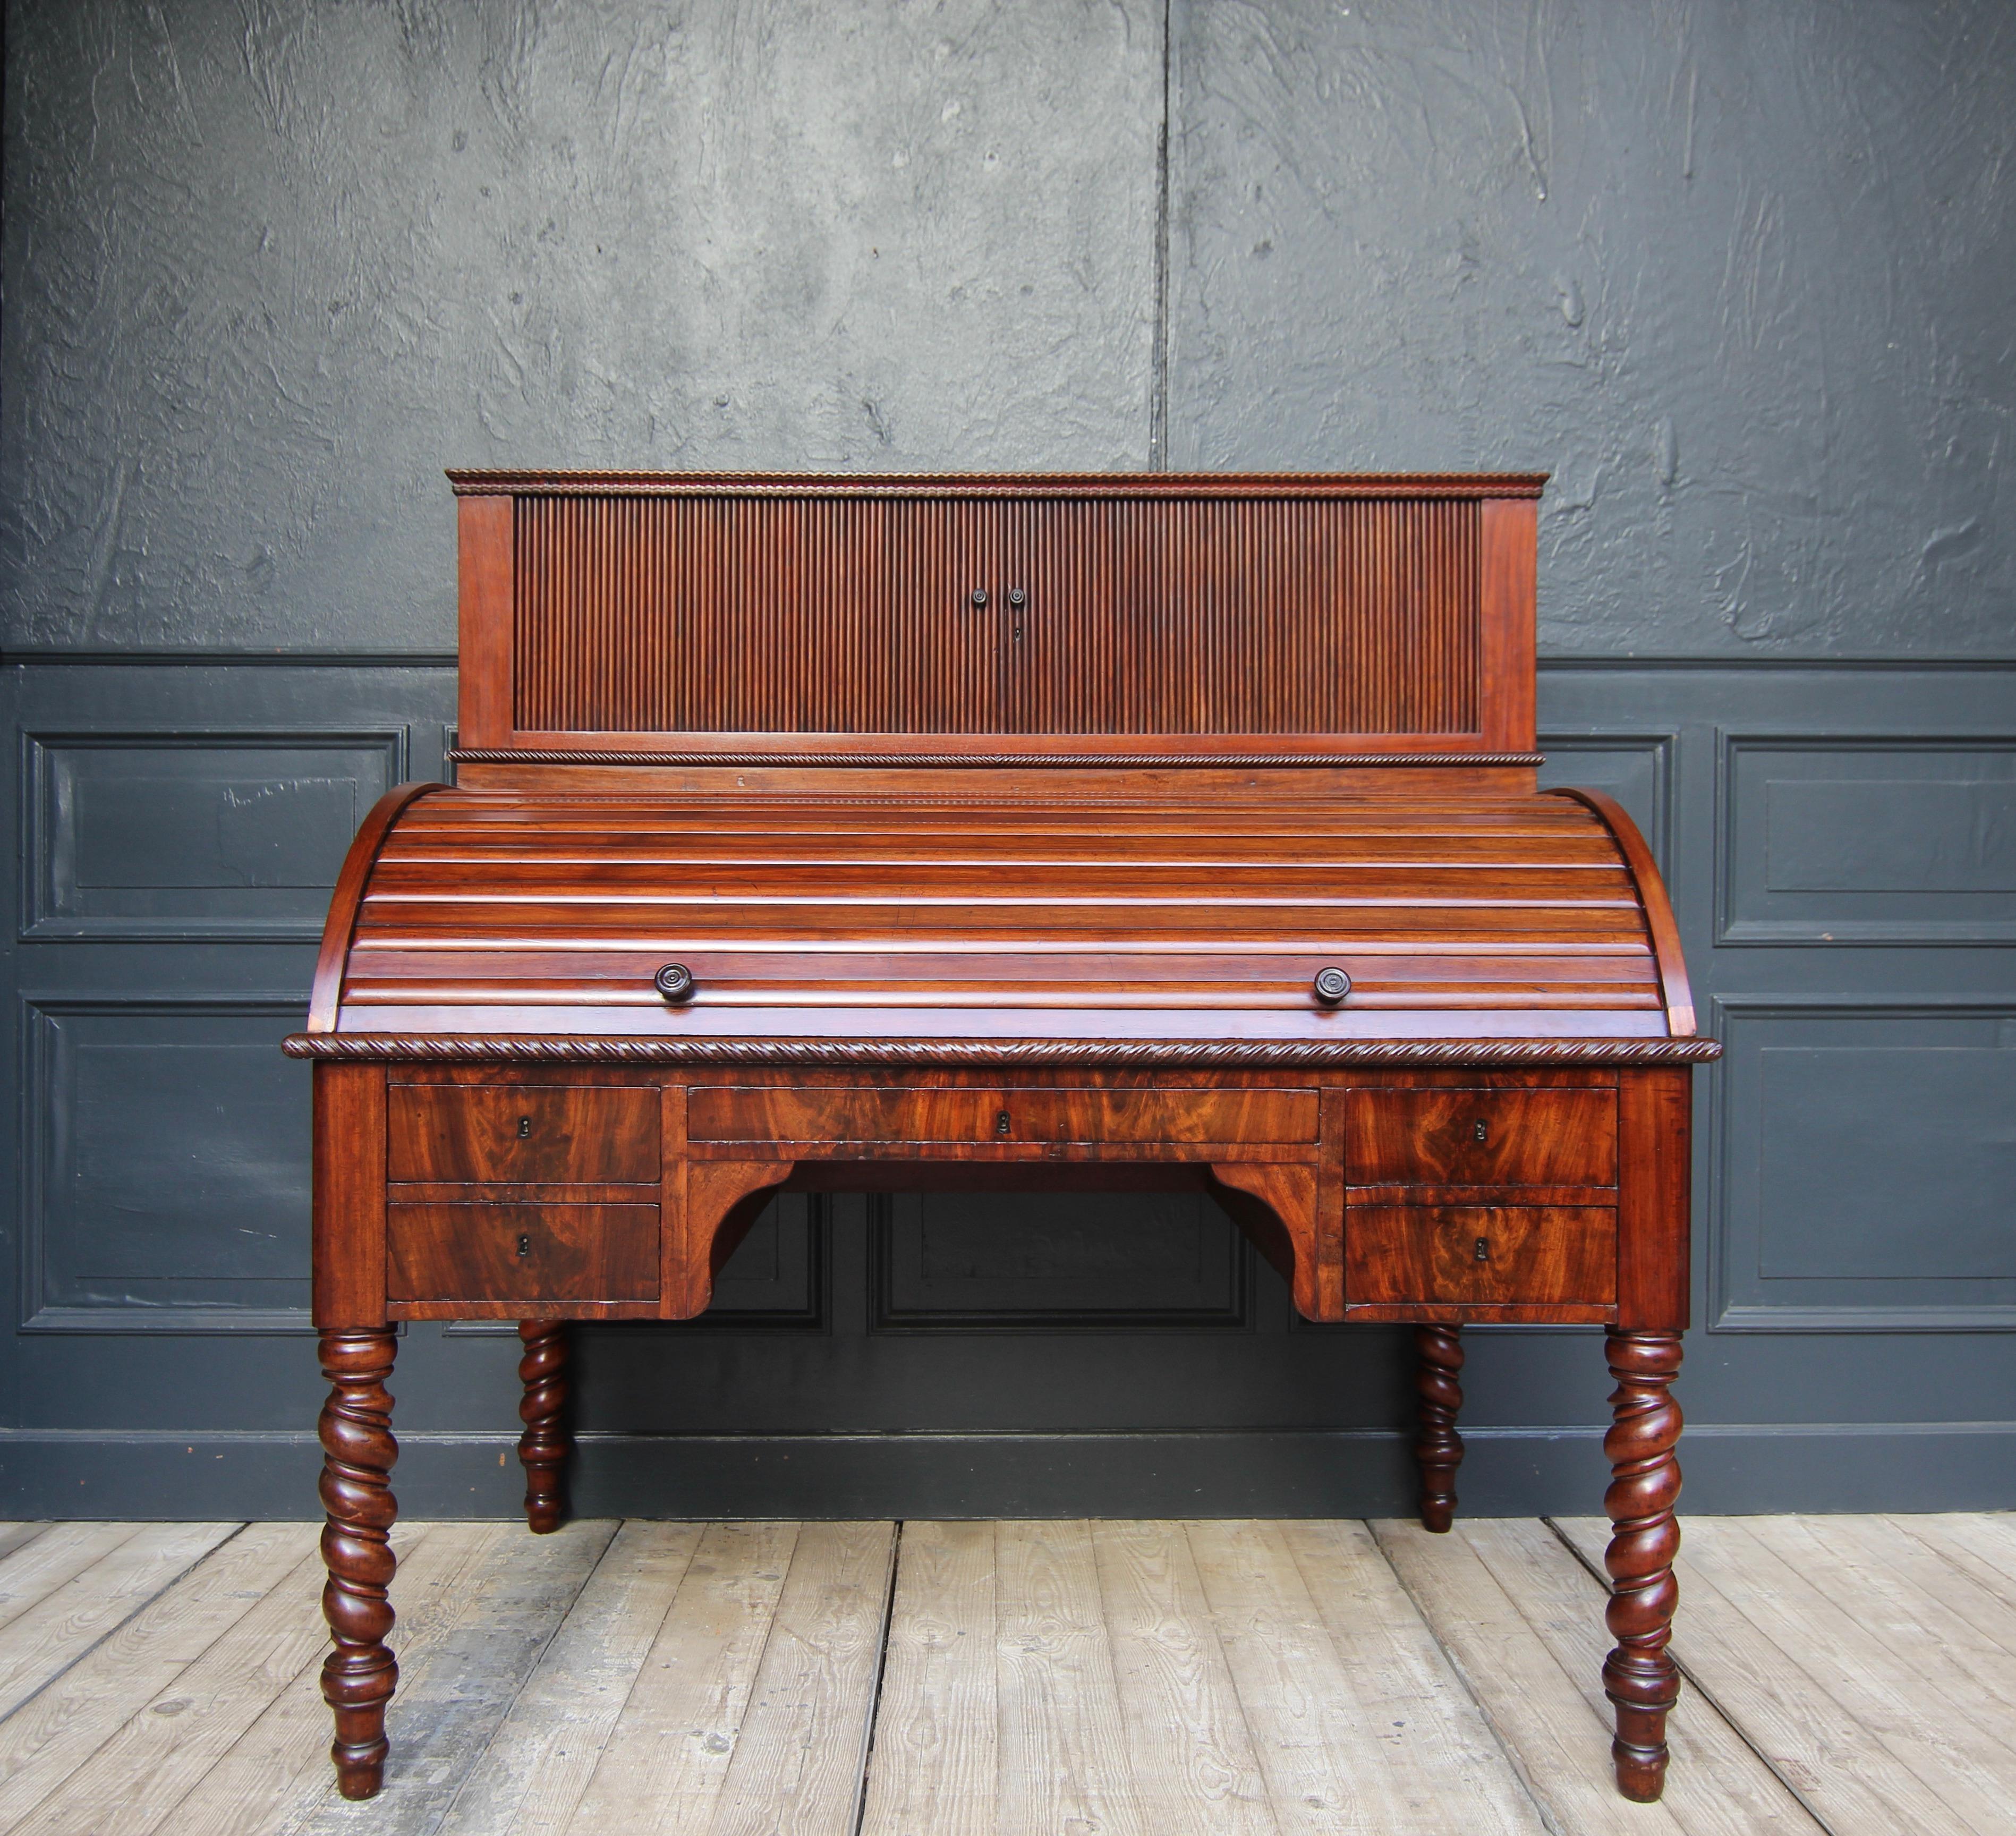 Roll bureau or roll secretary. Mid 19th century. Solid mahogany and veneered on oak. 

Standing on 4 twisted turned table legs with 5 long frame drawers, a work surface that can be closed with roller shutters and a top with sliding doors. The top